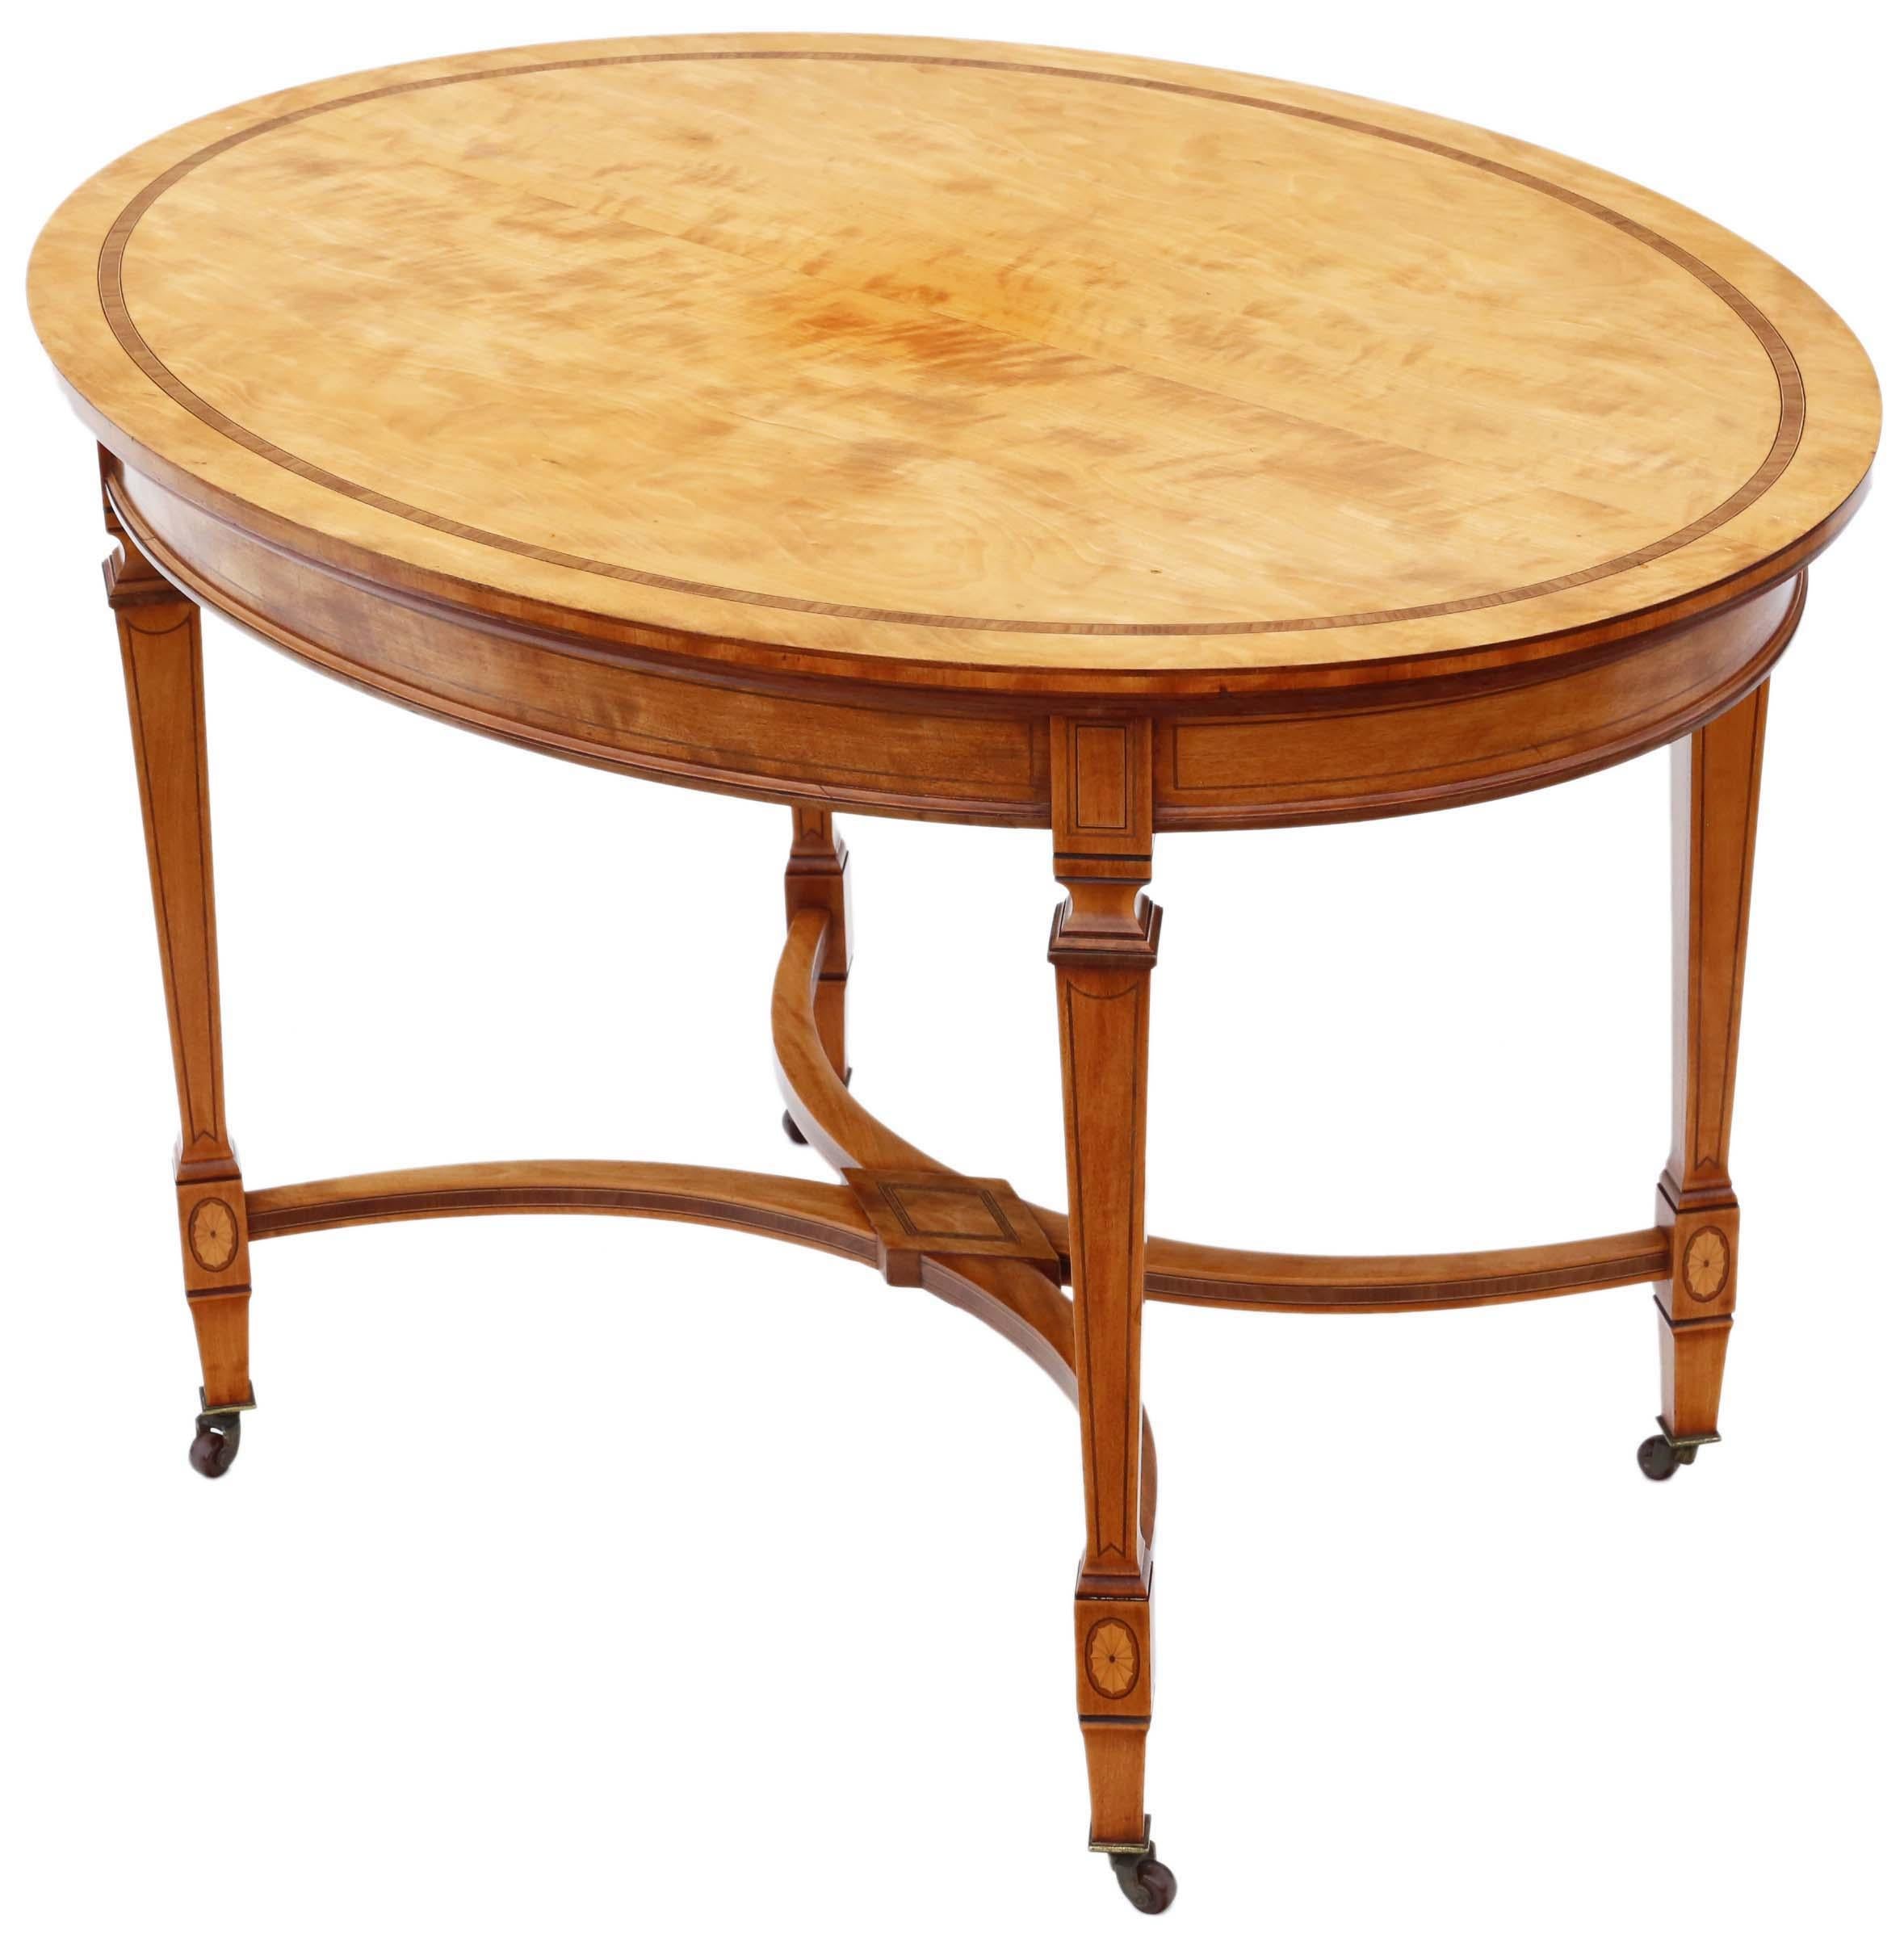 Offering an exquisite Aesthetic Victorian center or breakfast table dating from the late 19th to early 20th century, crafted with fine quality inlaid satinwood. This sturdy piece, with no loose joints, stands gracefully on period castors and